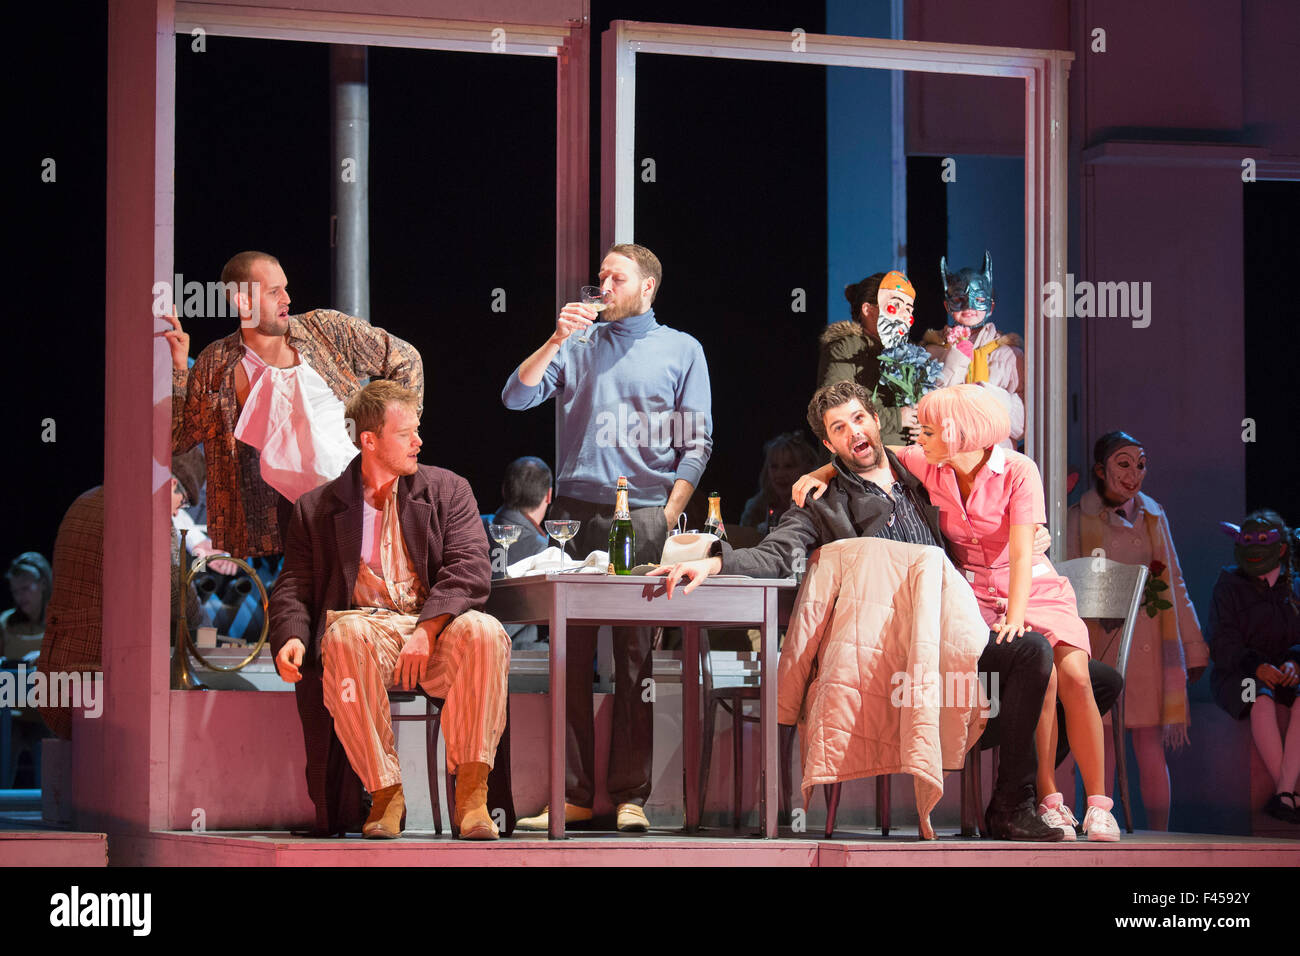 London, UK. 14/10/2015. Dress rehearsal of the Giacomo Puccini opera La Boheme directed by Benedict Andrews at the London Coliseum. Conducted by Xian Zhang. Cast: Corinne Winters as Mimi, Zach Borichevsky as Rodolfo, Duncan Rock as Marcello and Rhian Lois as Musetta. Stock Photo